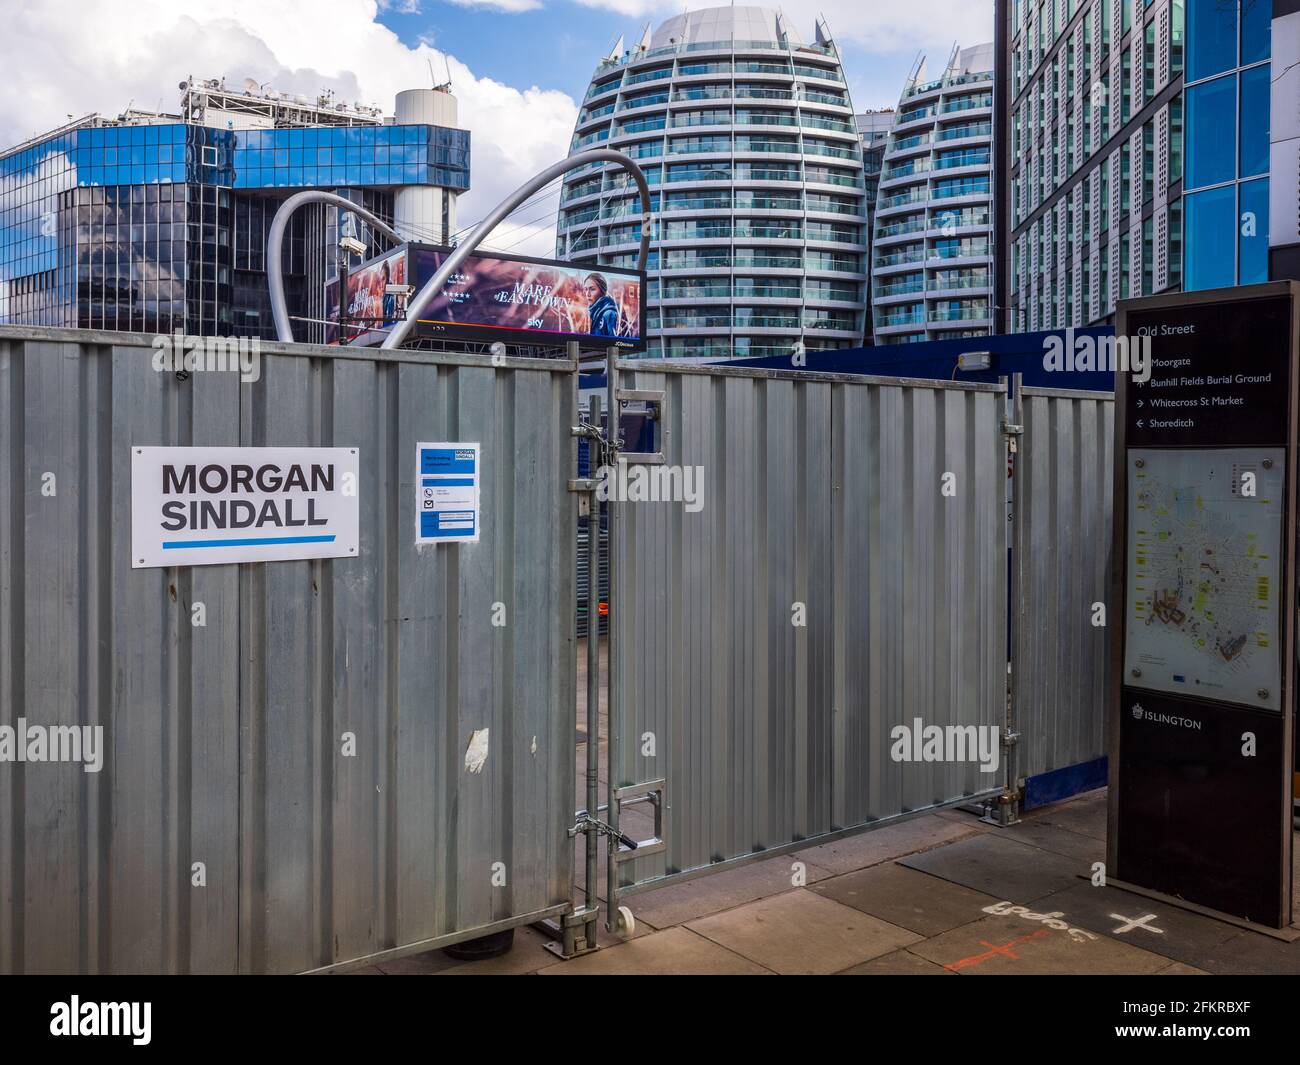 Morgan Sindall Building Site Old Street Roundabout Shoreditch London. Morgan Sindall Group plc is a British Construction company, founded 1977. Stock Photo